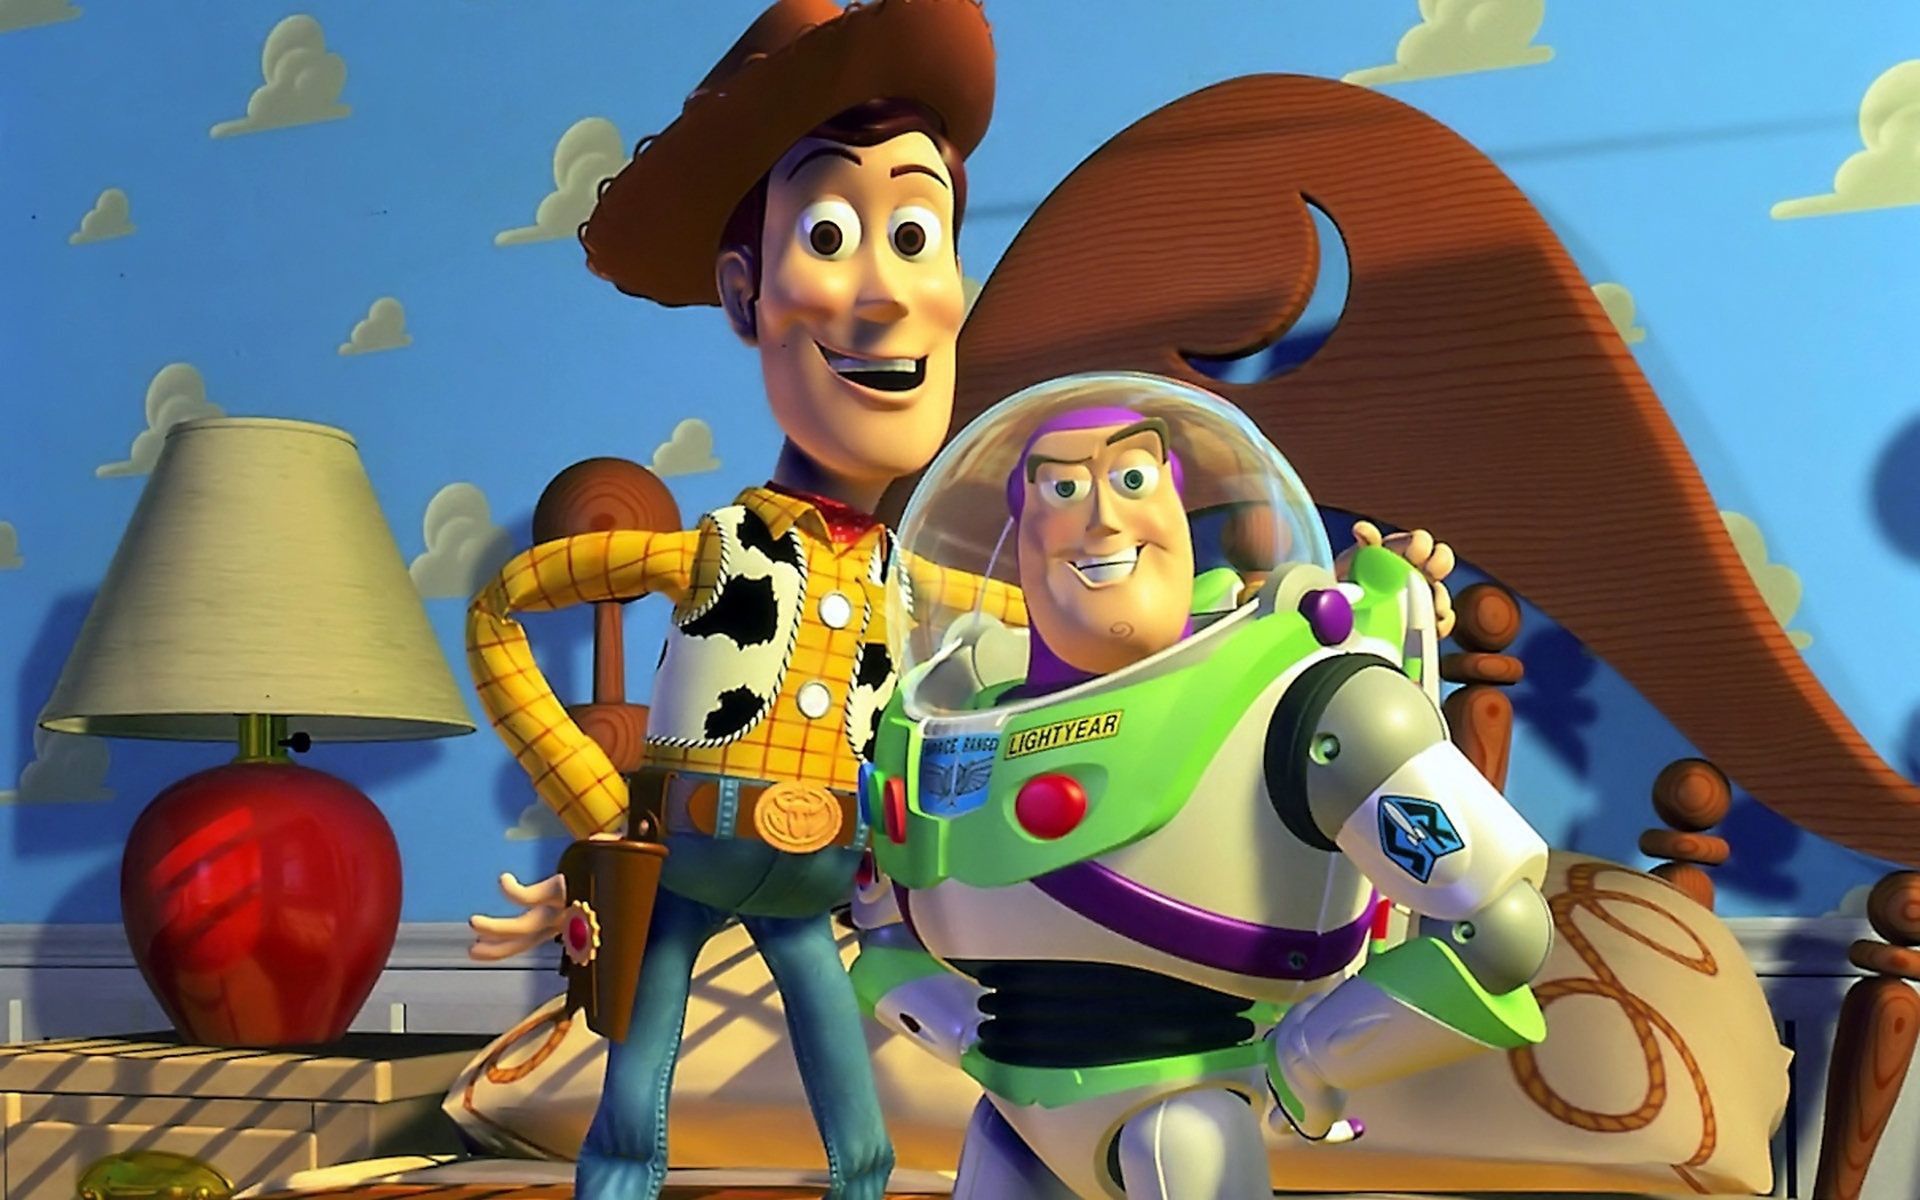 Toy Story 3 Computer Wallpapers, Desktop Backgrounds 1920x1200